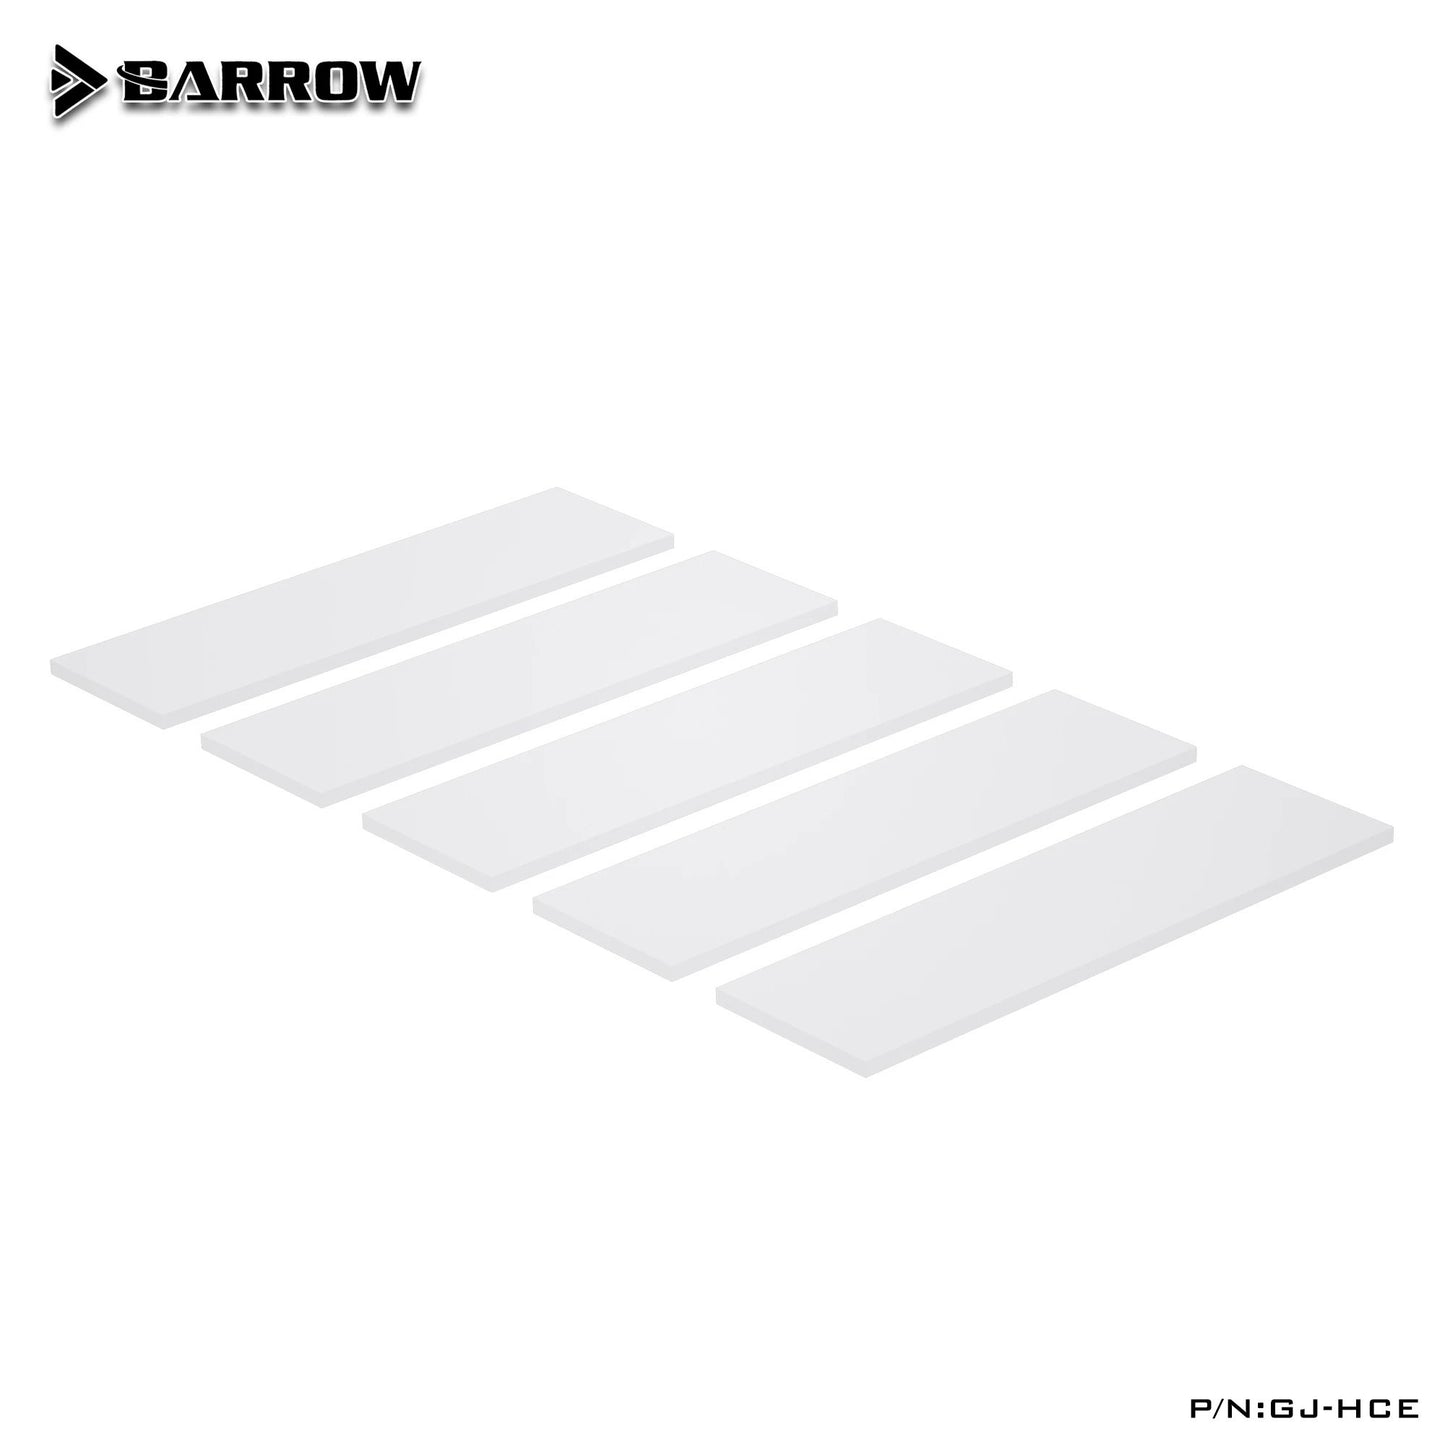 BARROW Silicon Grease Thermal Pad Kit For GPU Water Cooling Block Heat Dissipation, High Performance Conductive Heatsink, GJ-HCE